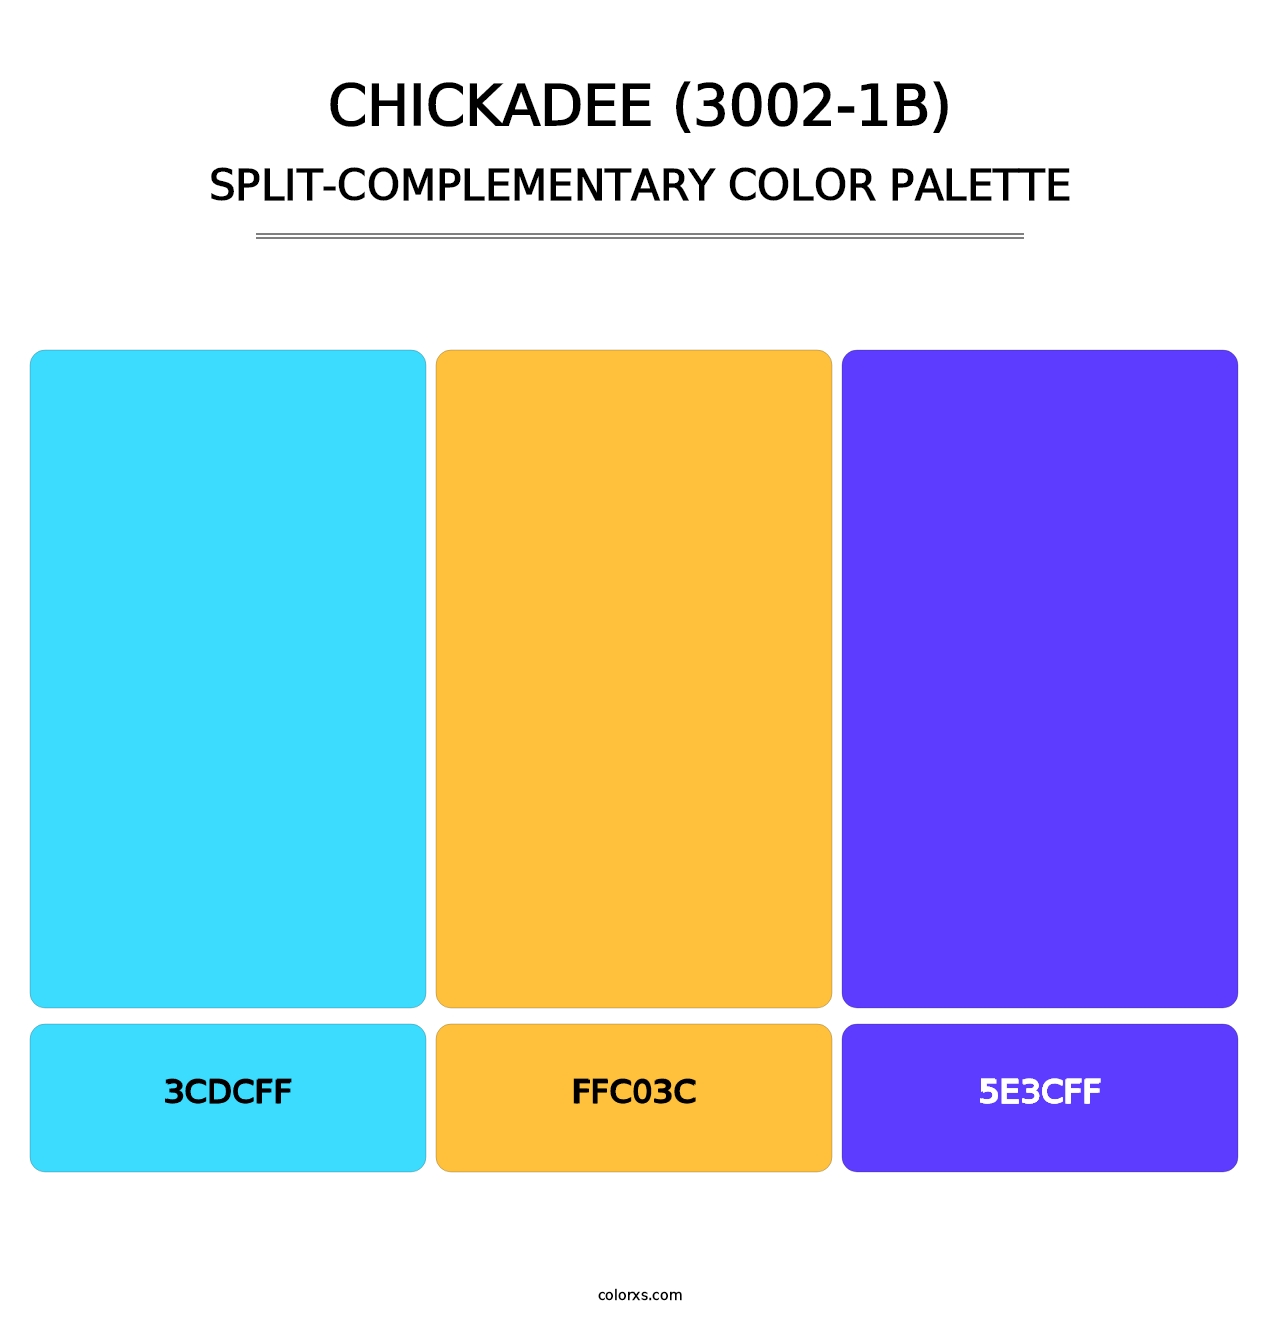 Chickadee (3002-1B) - Split-Complementary Color Palette